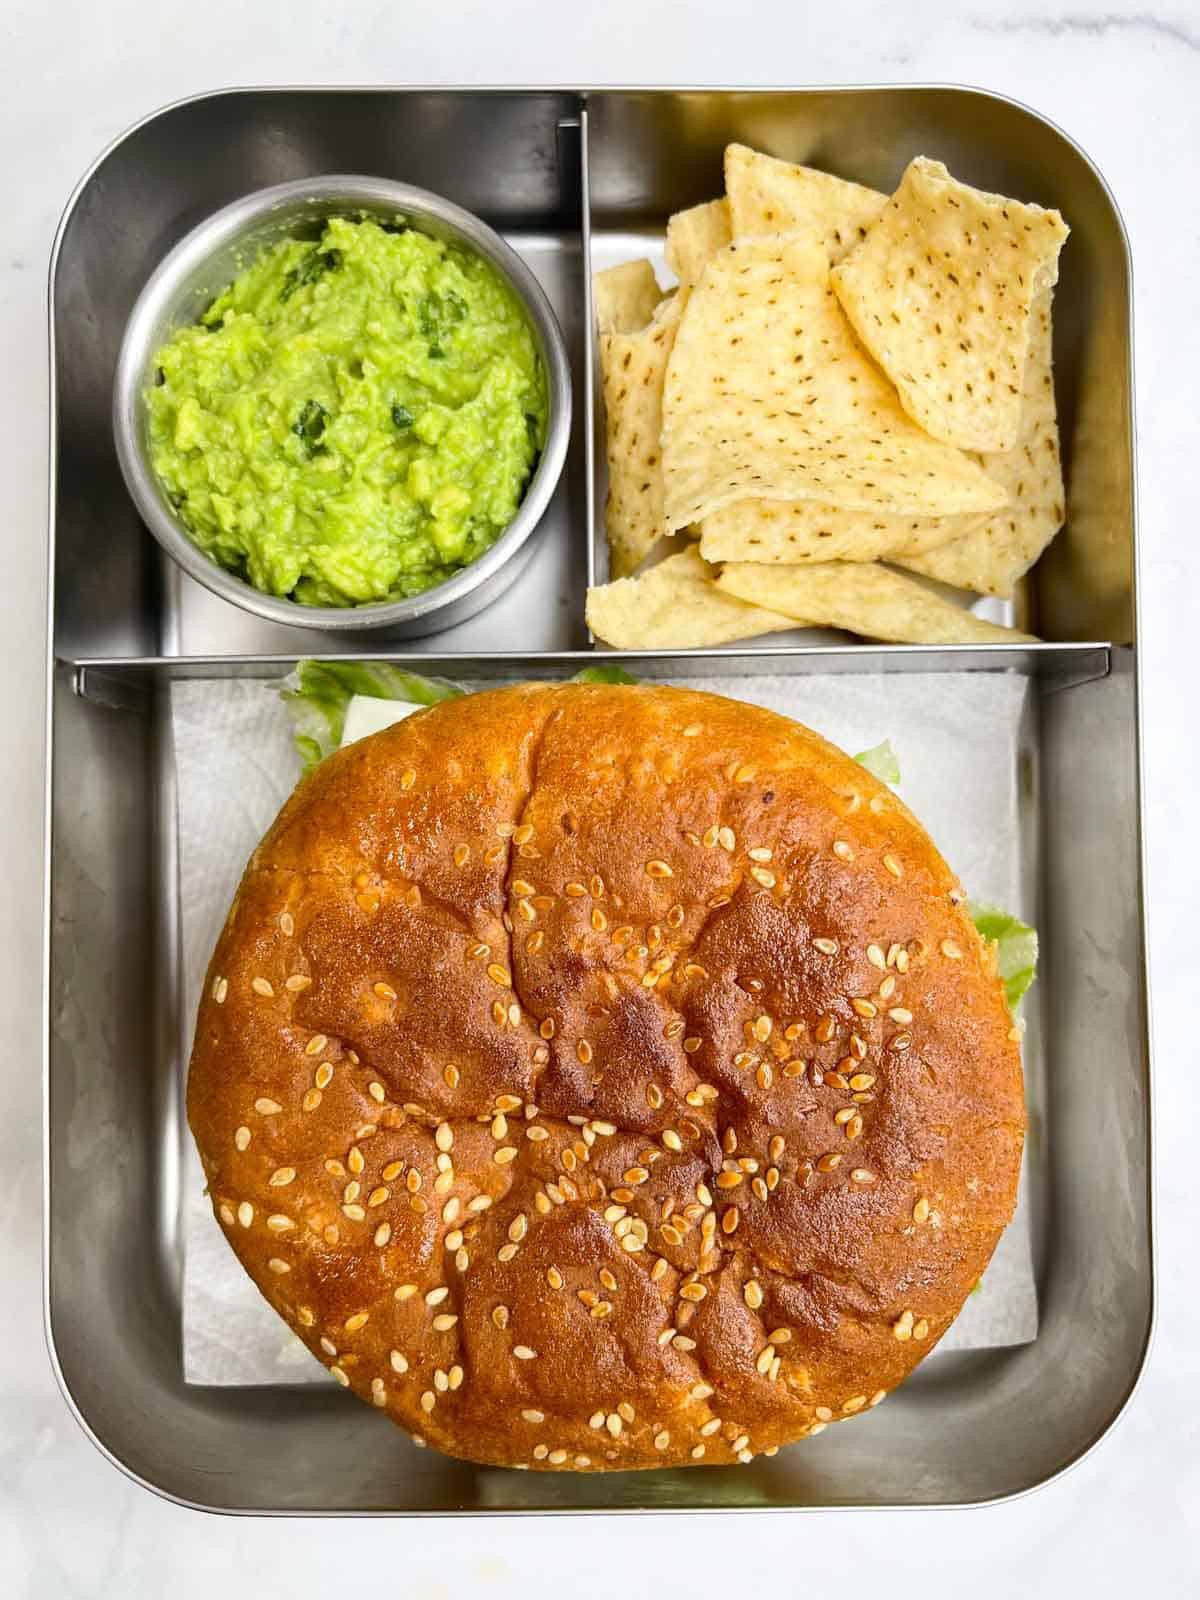 veggie burger with chips and guacamole in bento steel lunch box.